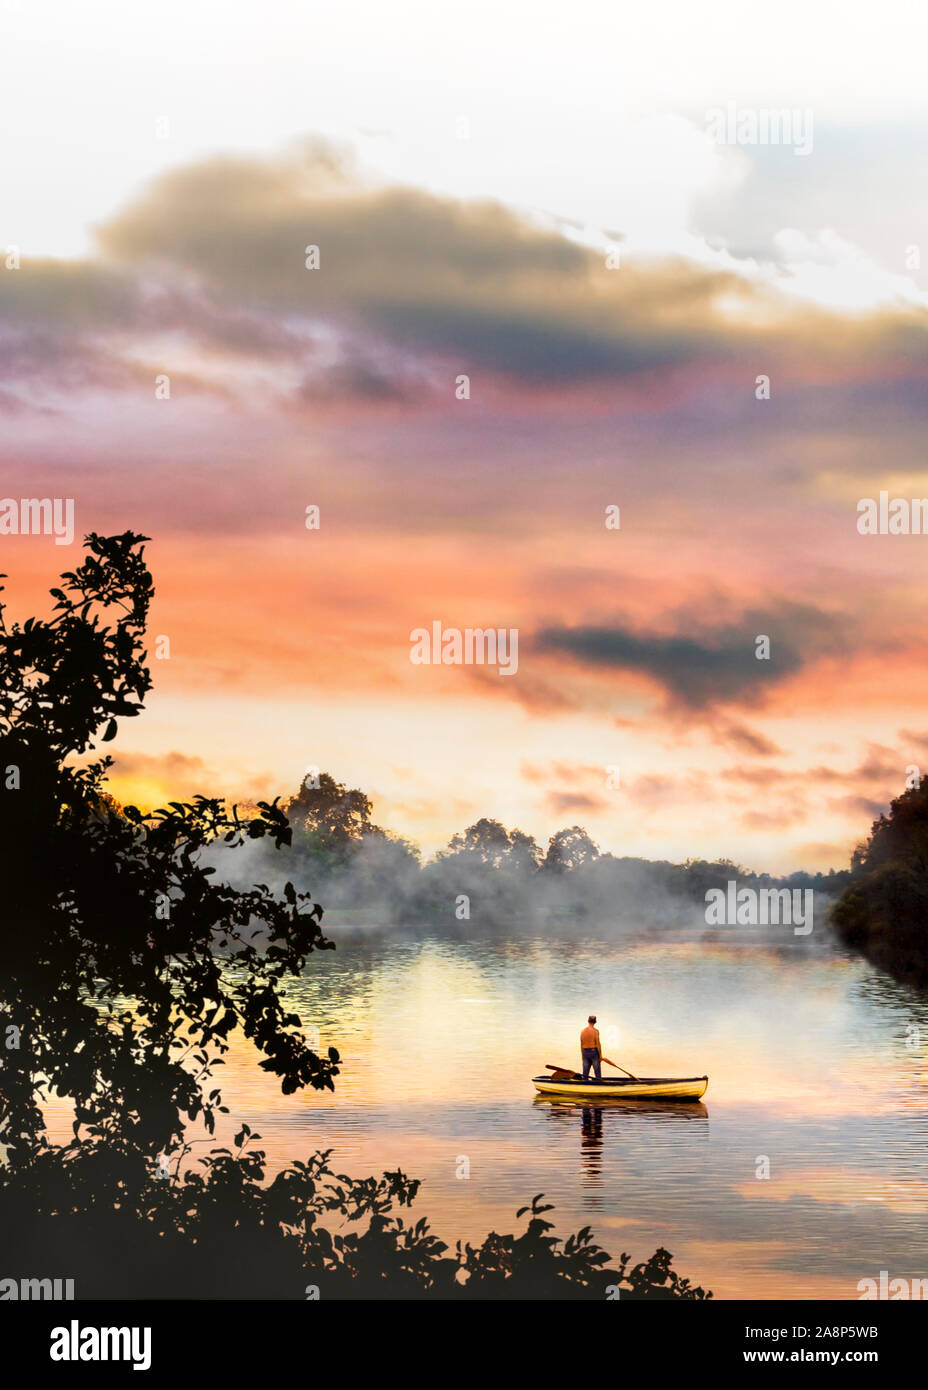 Illustration of one man standing in a rowing boat at sunset, looking upriver as a stream of smoke or mist drifts downstream, suitable for book cover Stock Photo